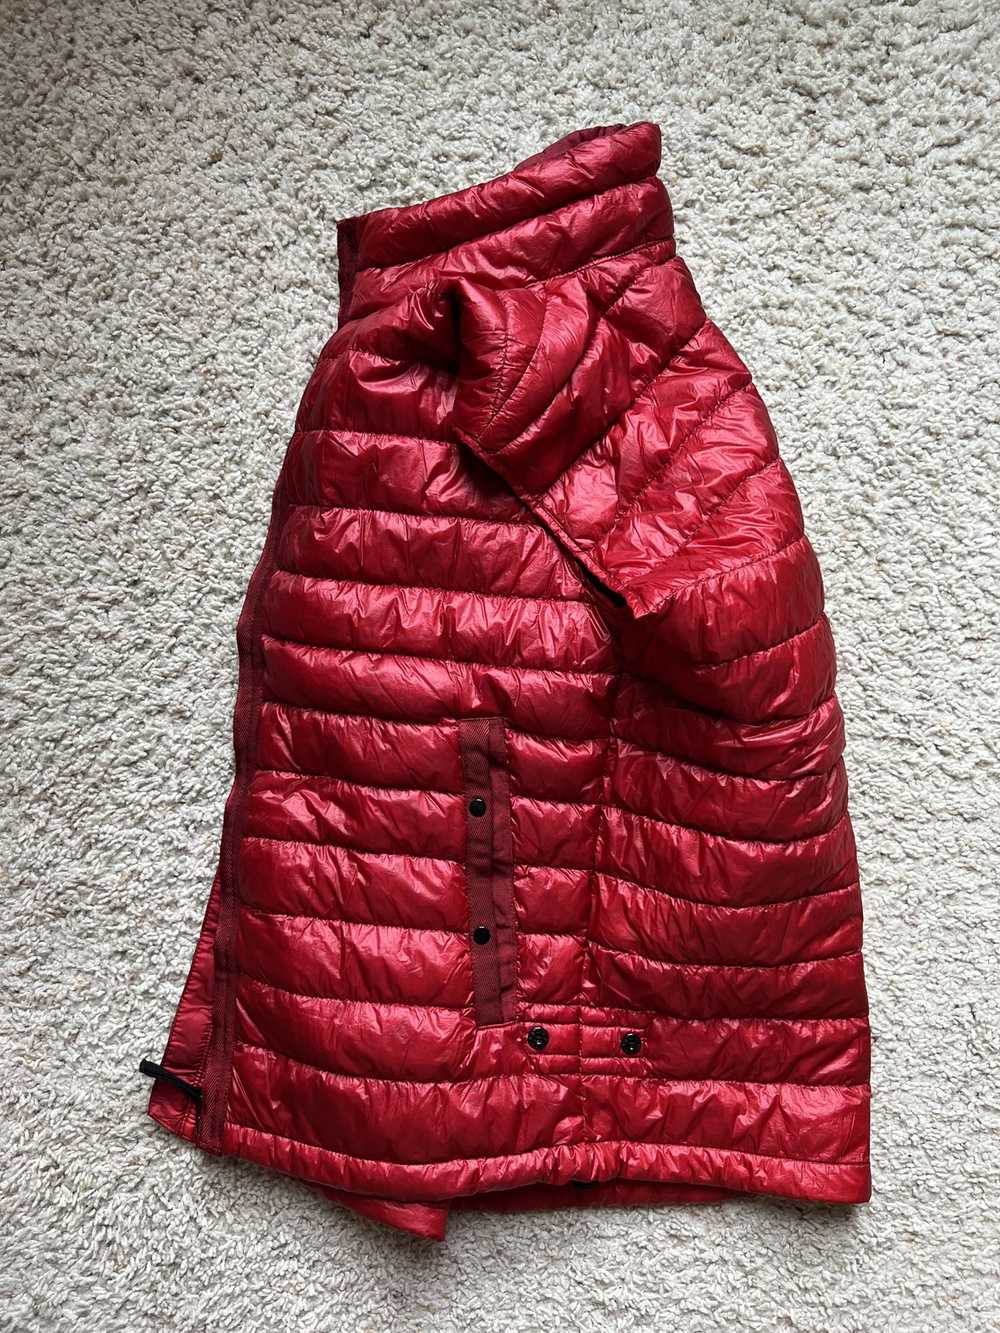 Stone Island Garment Dyed Down Vest size L Red - image 4